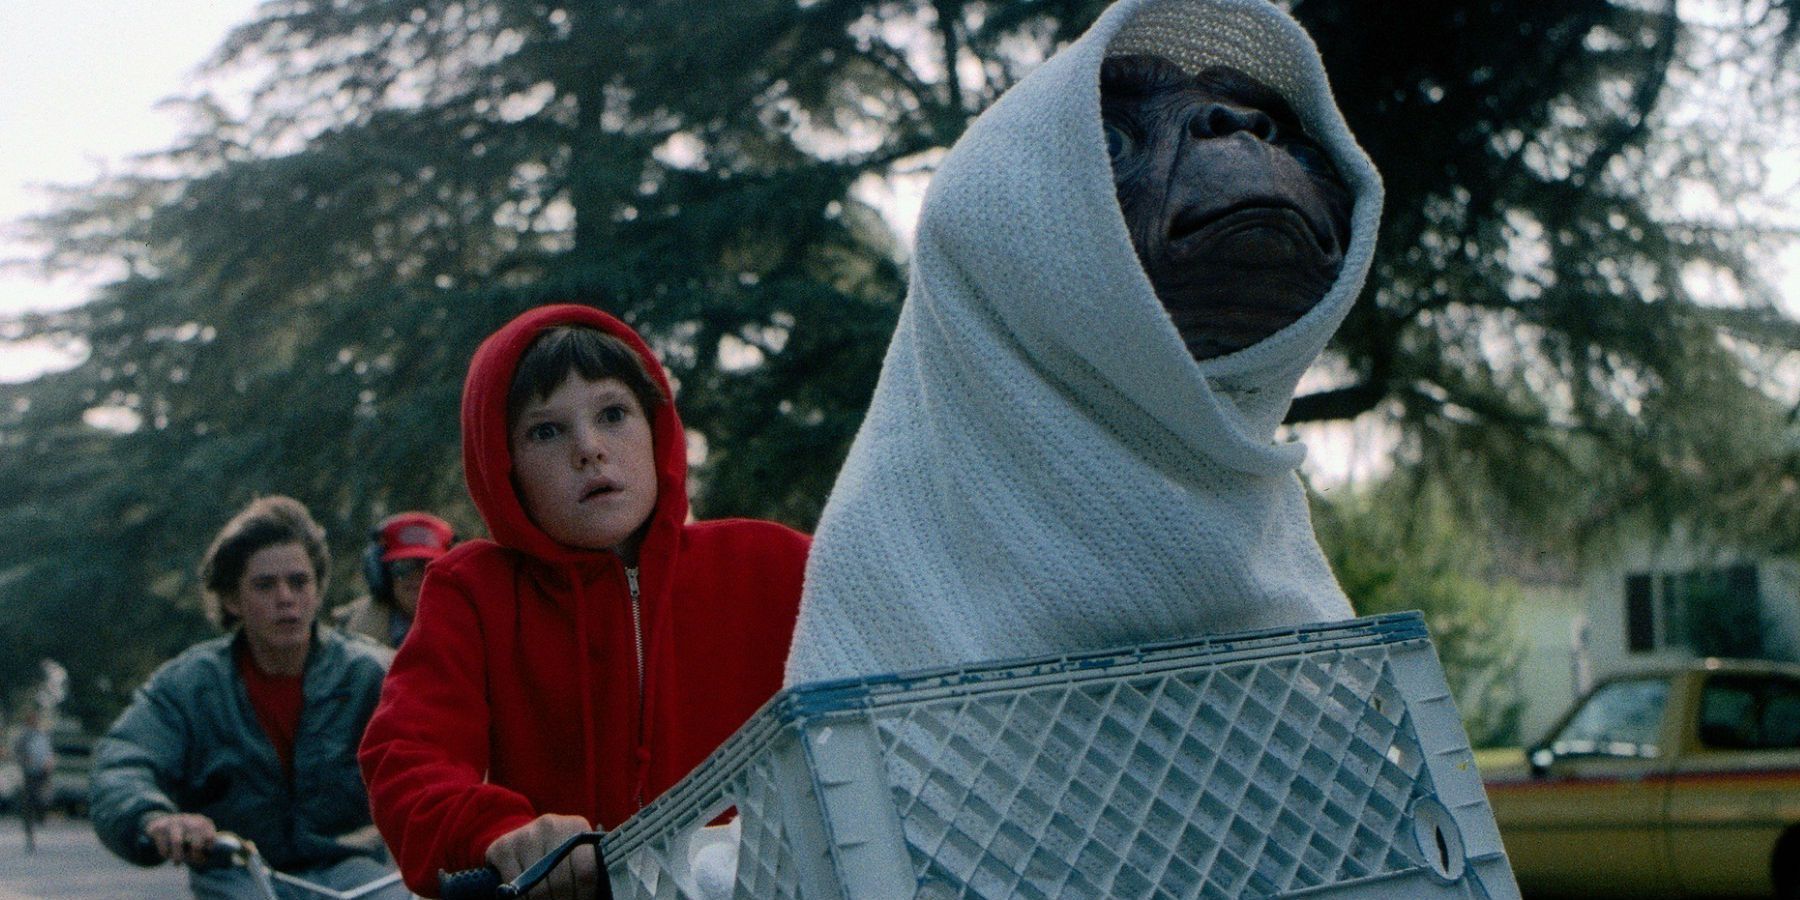 21 Things You Might Not Know About the E.T. Movie - Parade